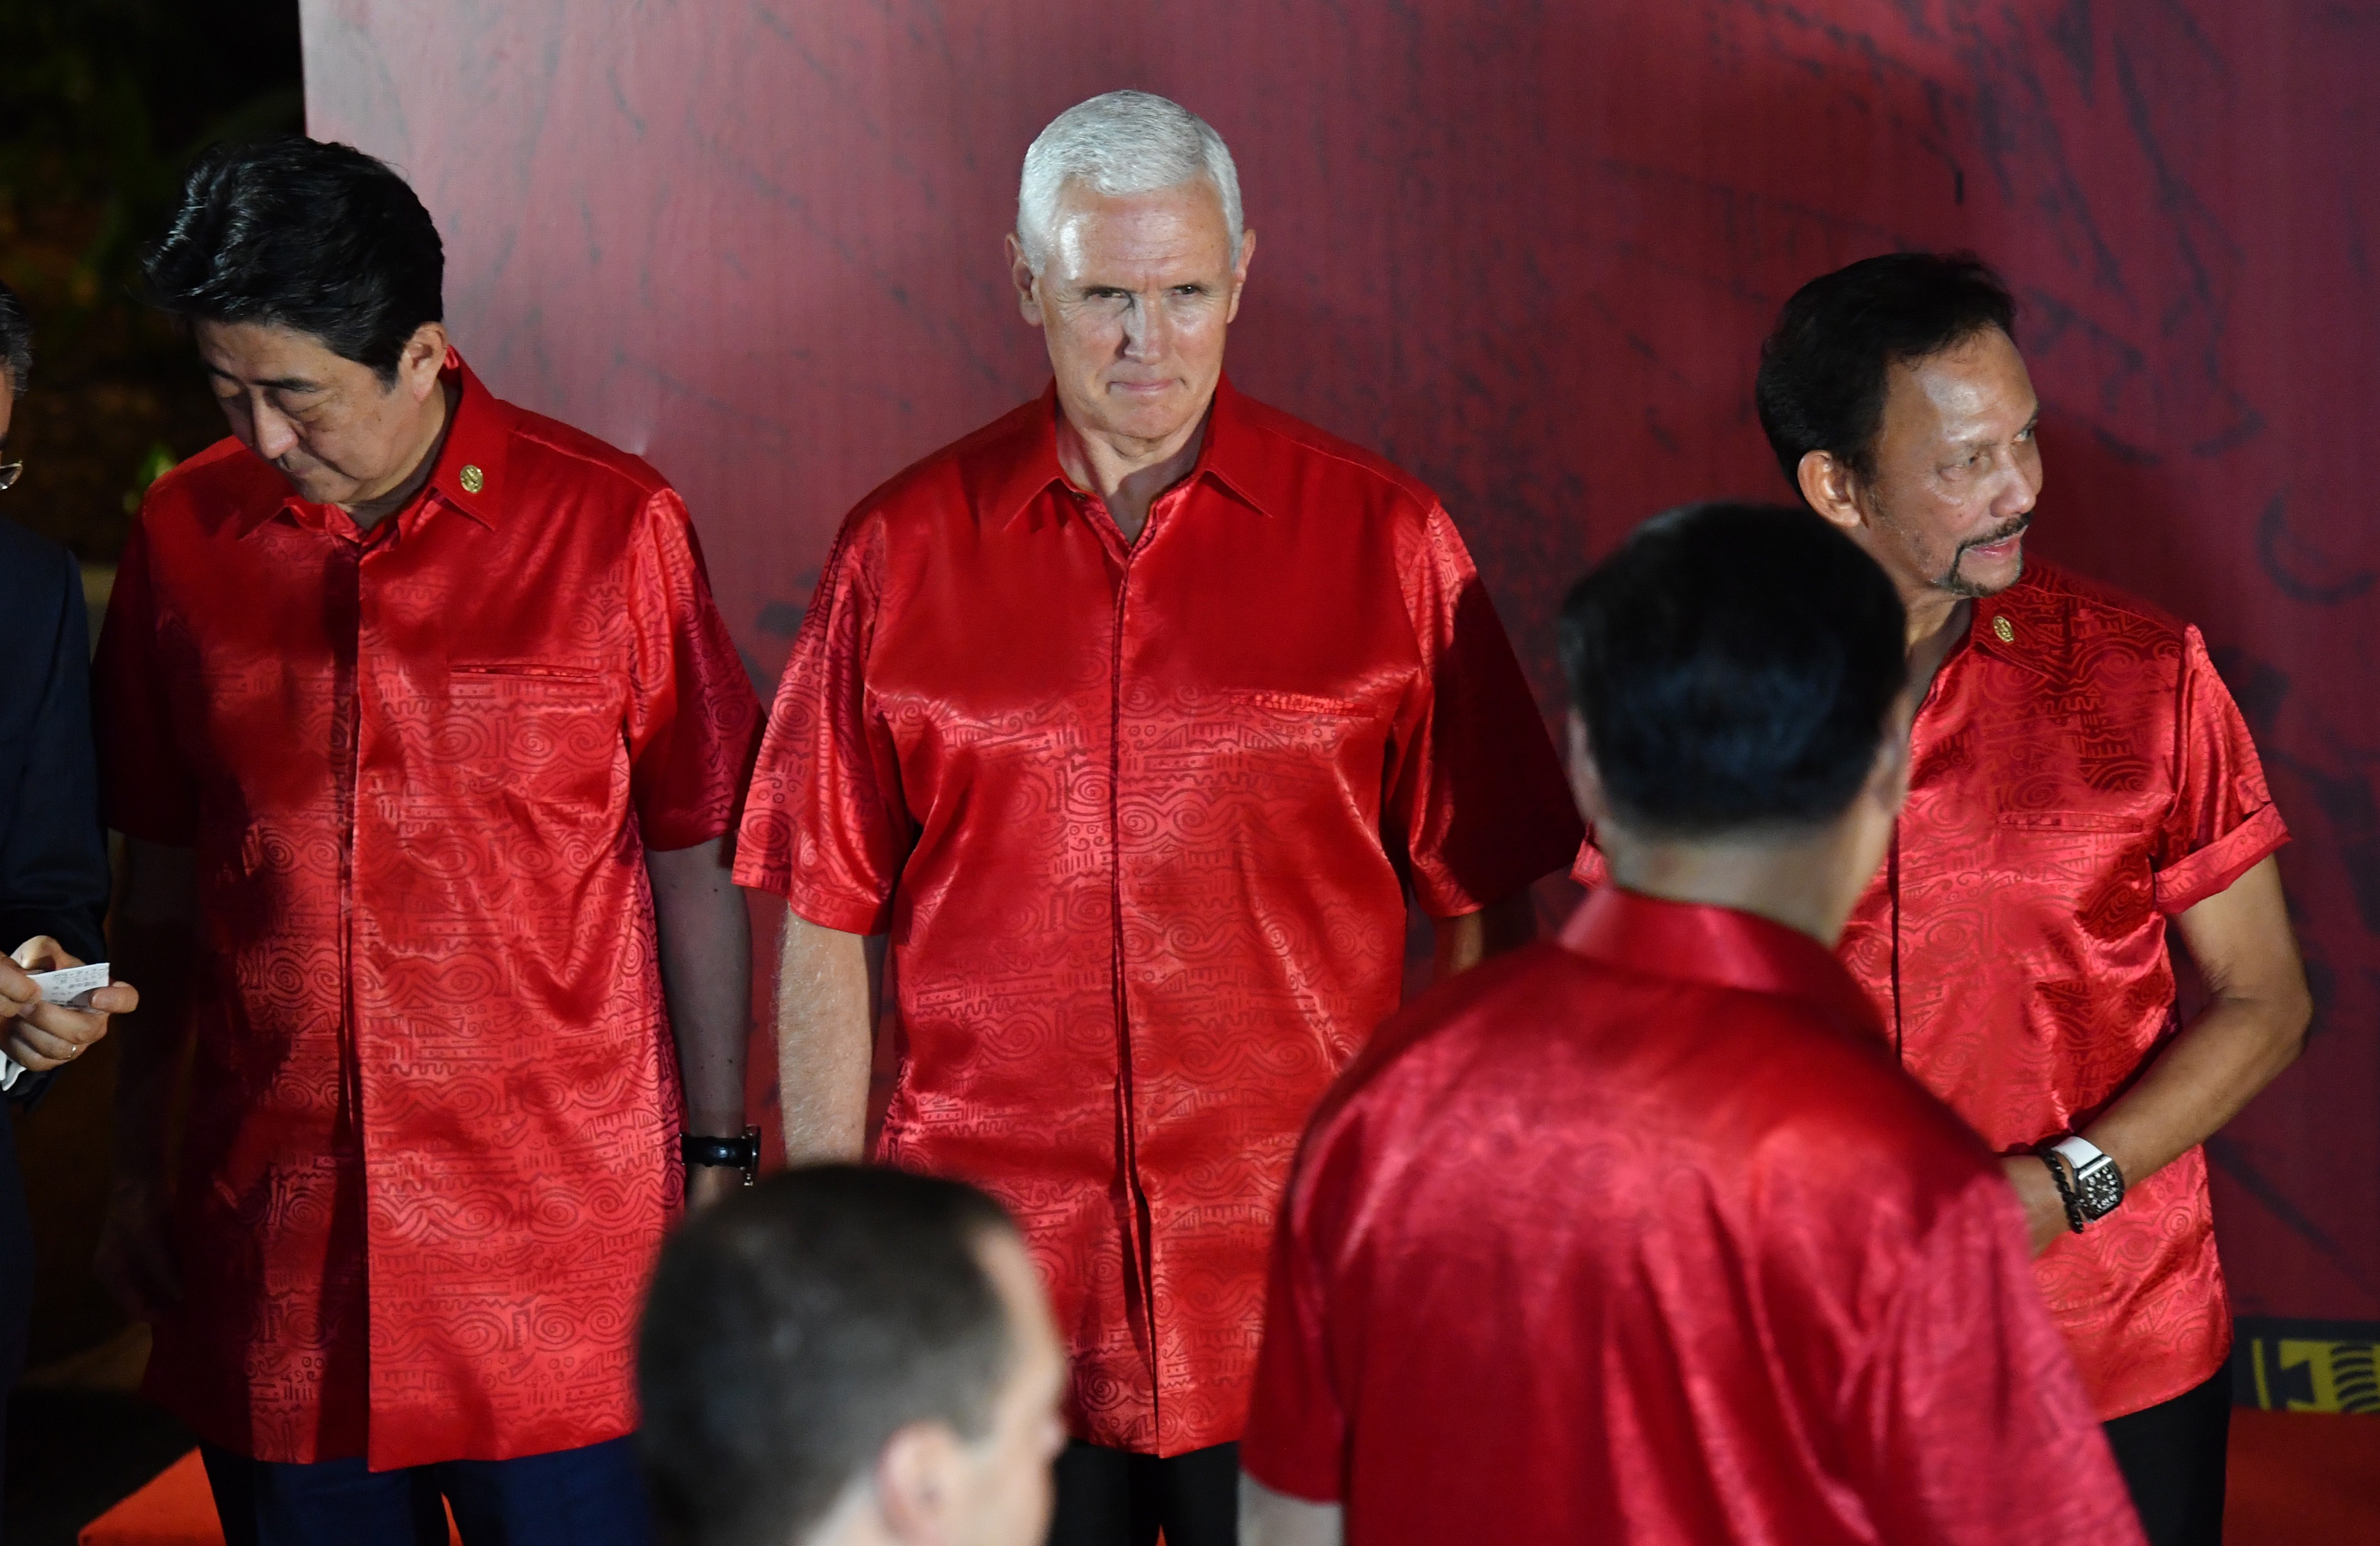 United States Vice President Mike Pence locks eyes with Chinese President Xi Jinping before the official “family” photograph at this month’s Apec summit in Papua New Guinea. Photo: EPA